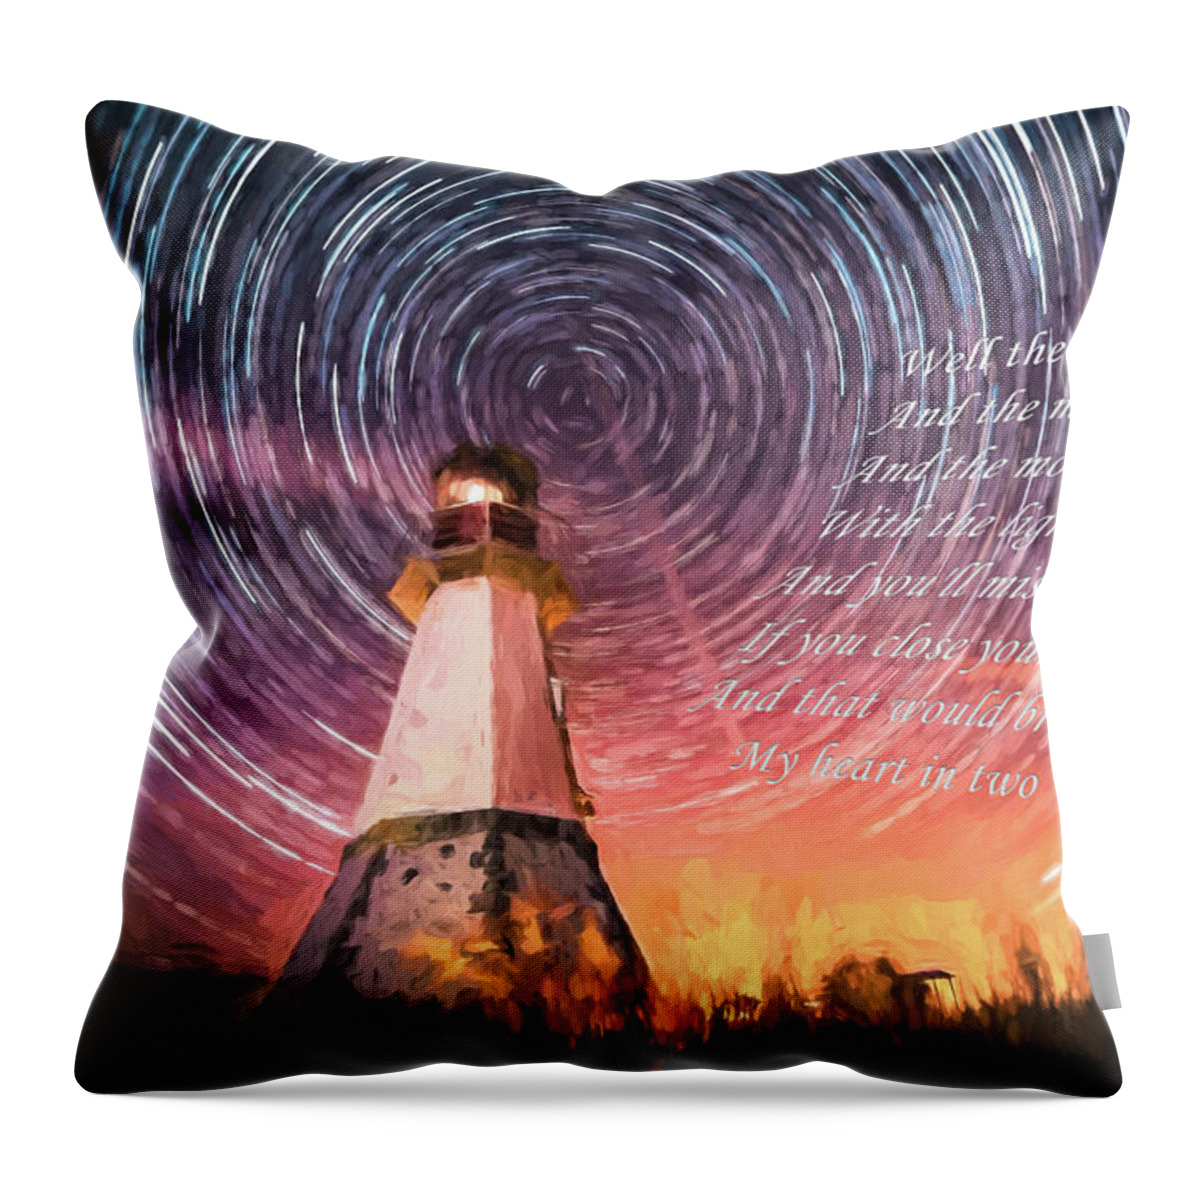 Architecture Throw Pillow featuring the digital art If You Close Your Eyes Too by Gary Baird